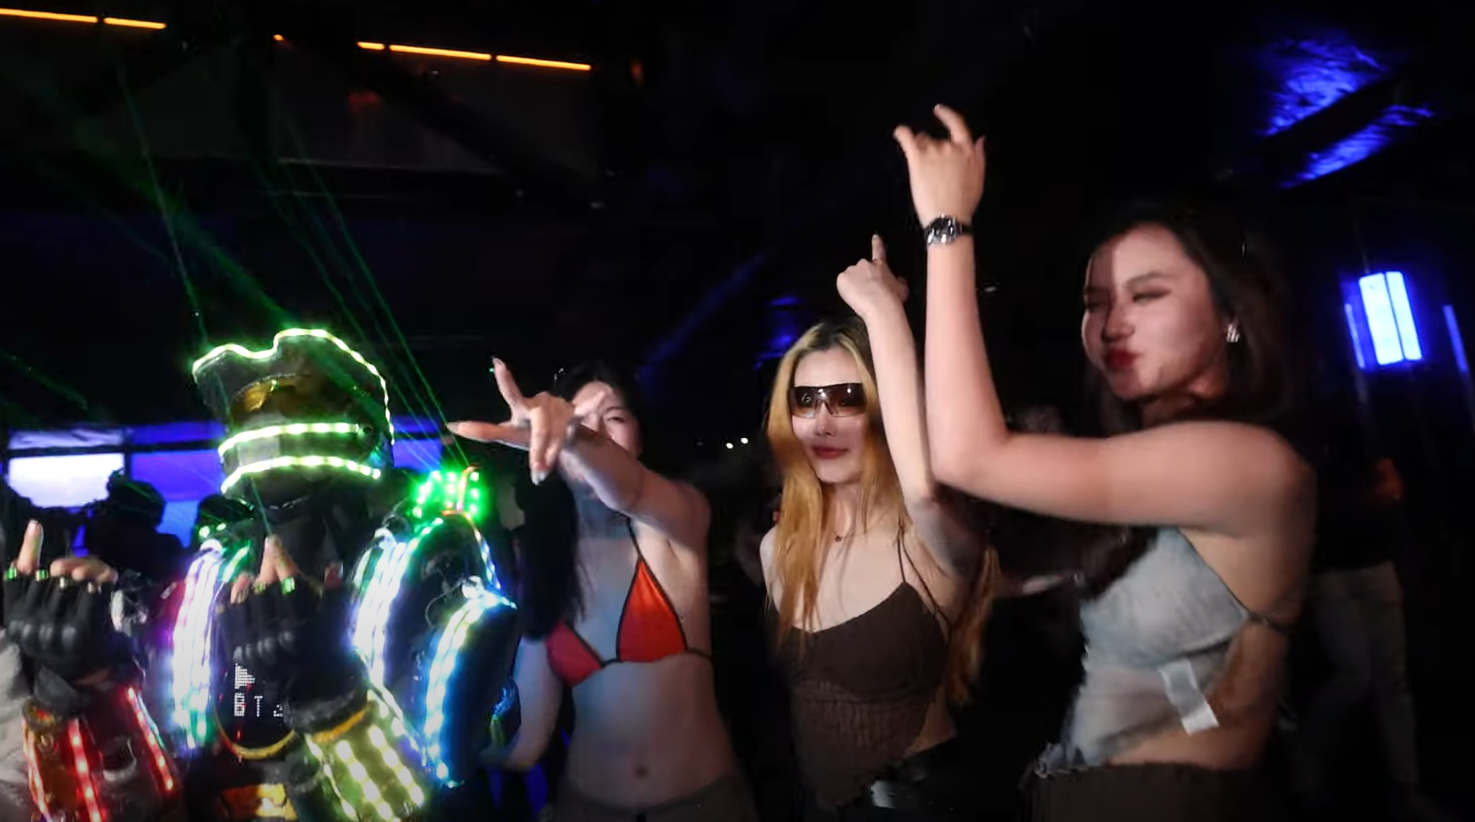 three girls and an LED costume dancing in night club